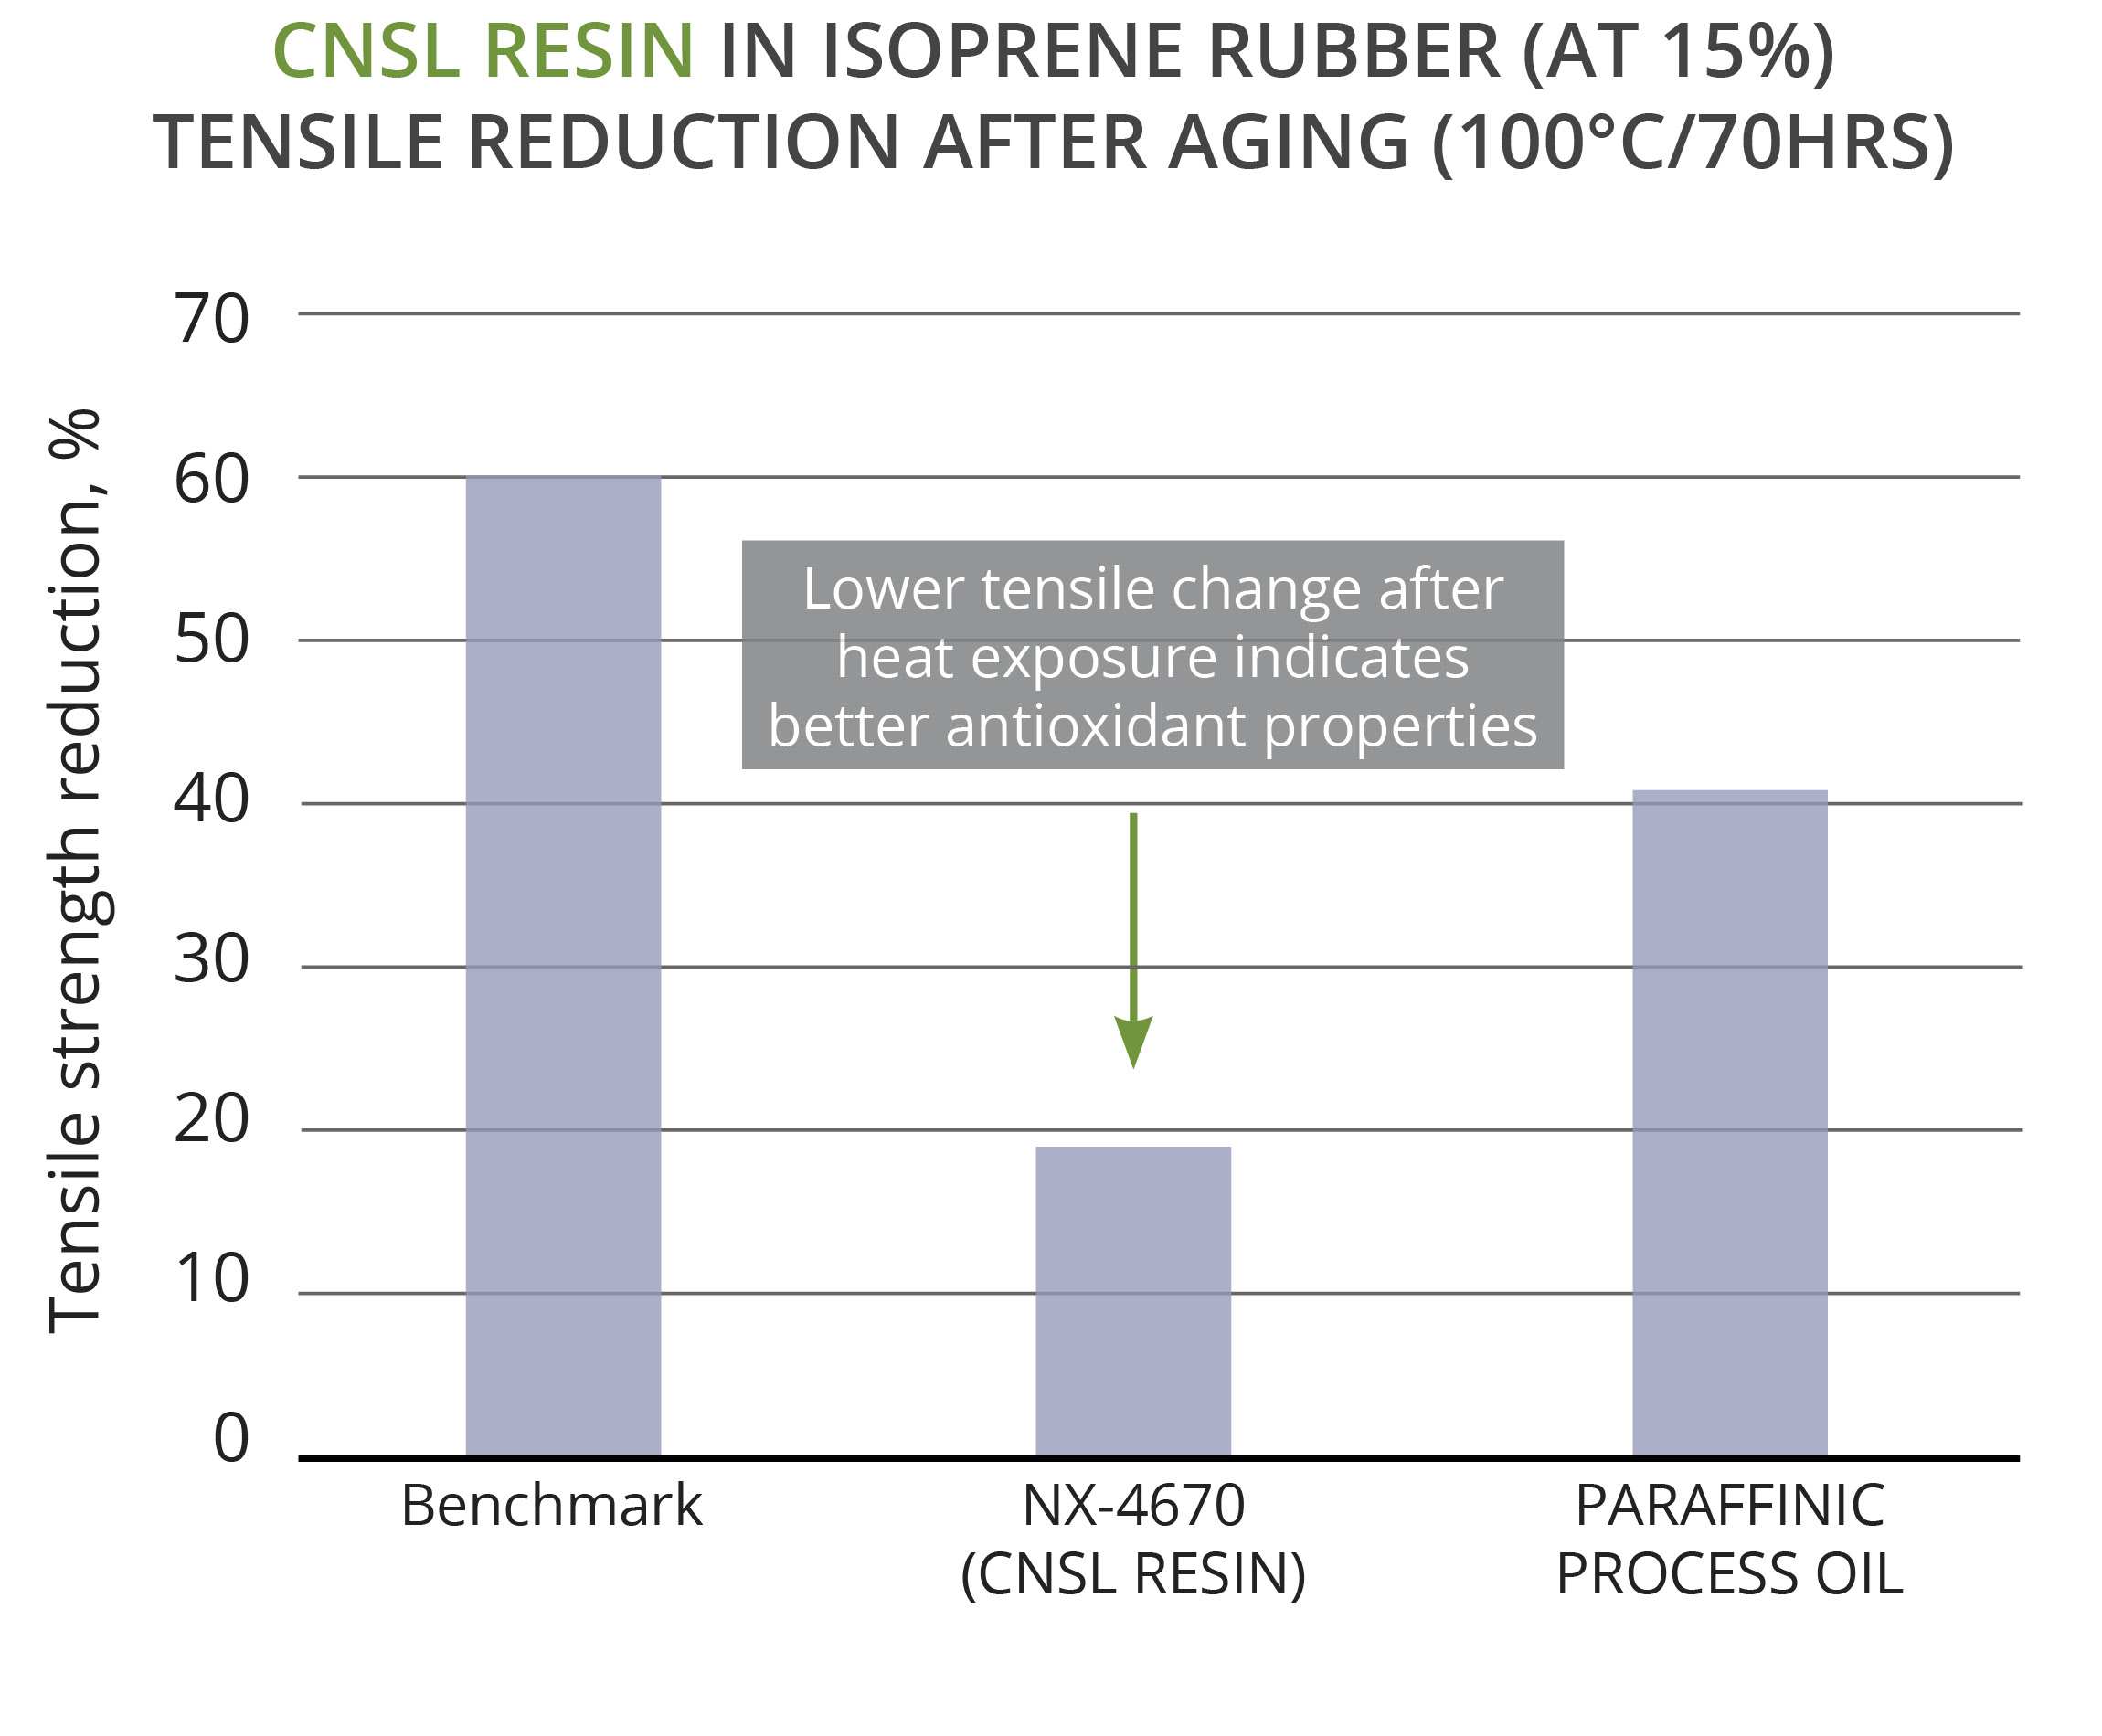 CNSL Resins show lower change in mechanical properties after aging in rubber formulation